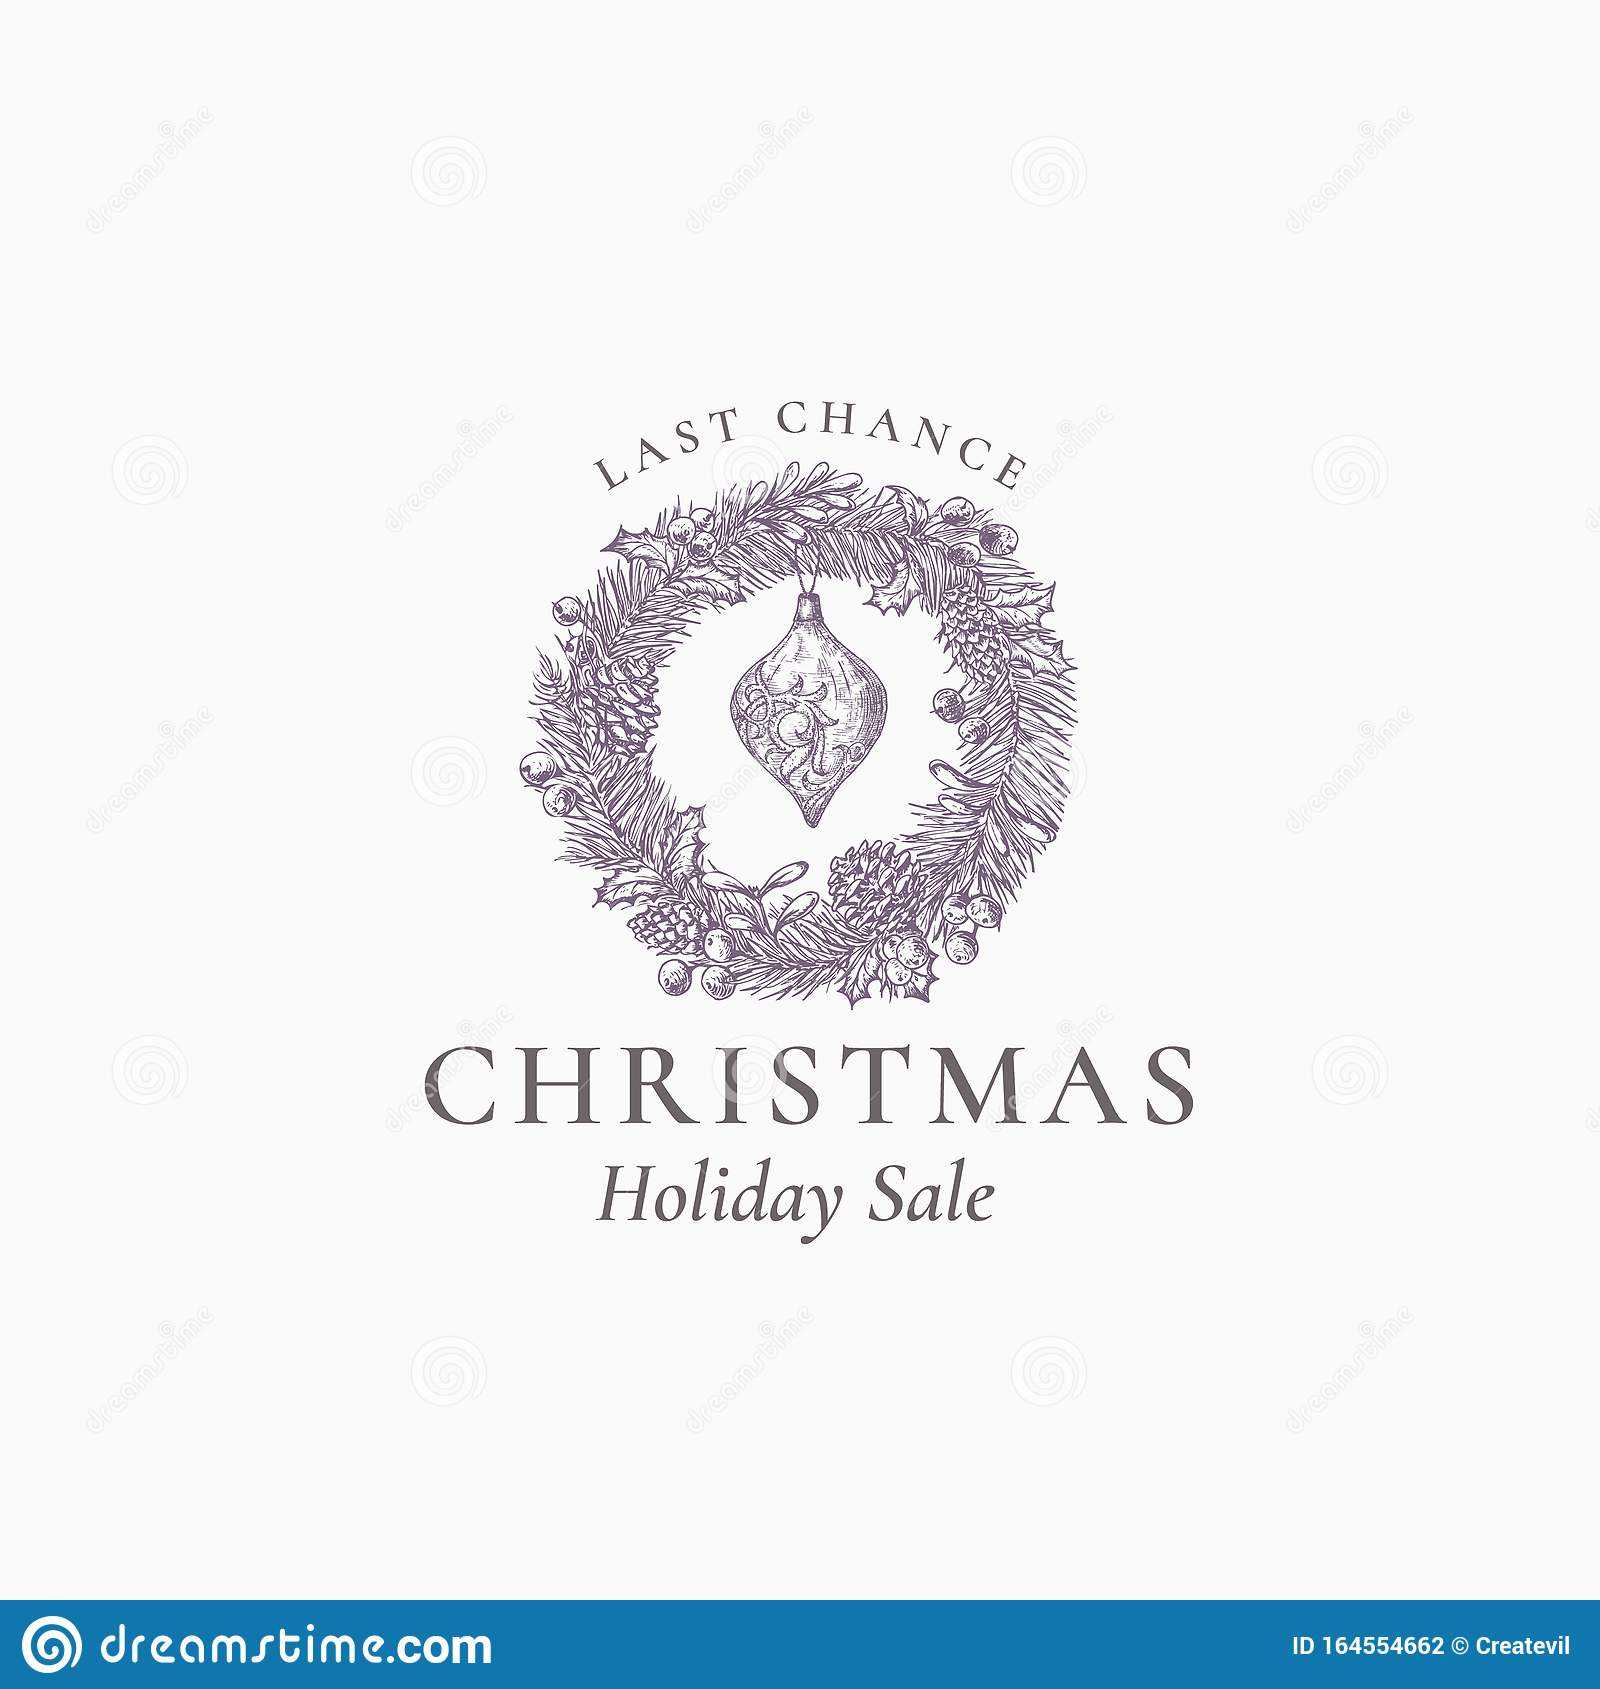 Last Chance Christmas Sale Discount Sketch Pine Wreath, Sign With Chance Card Template